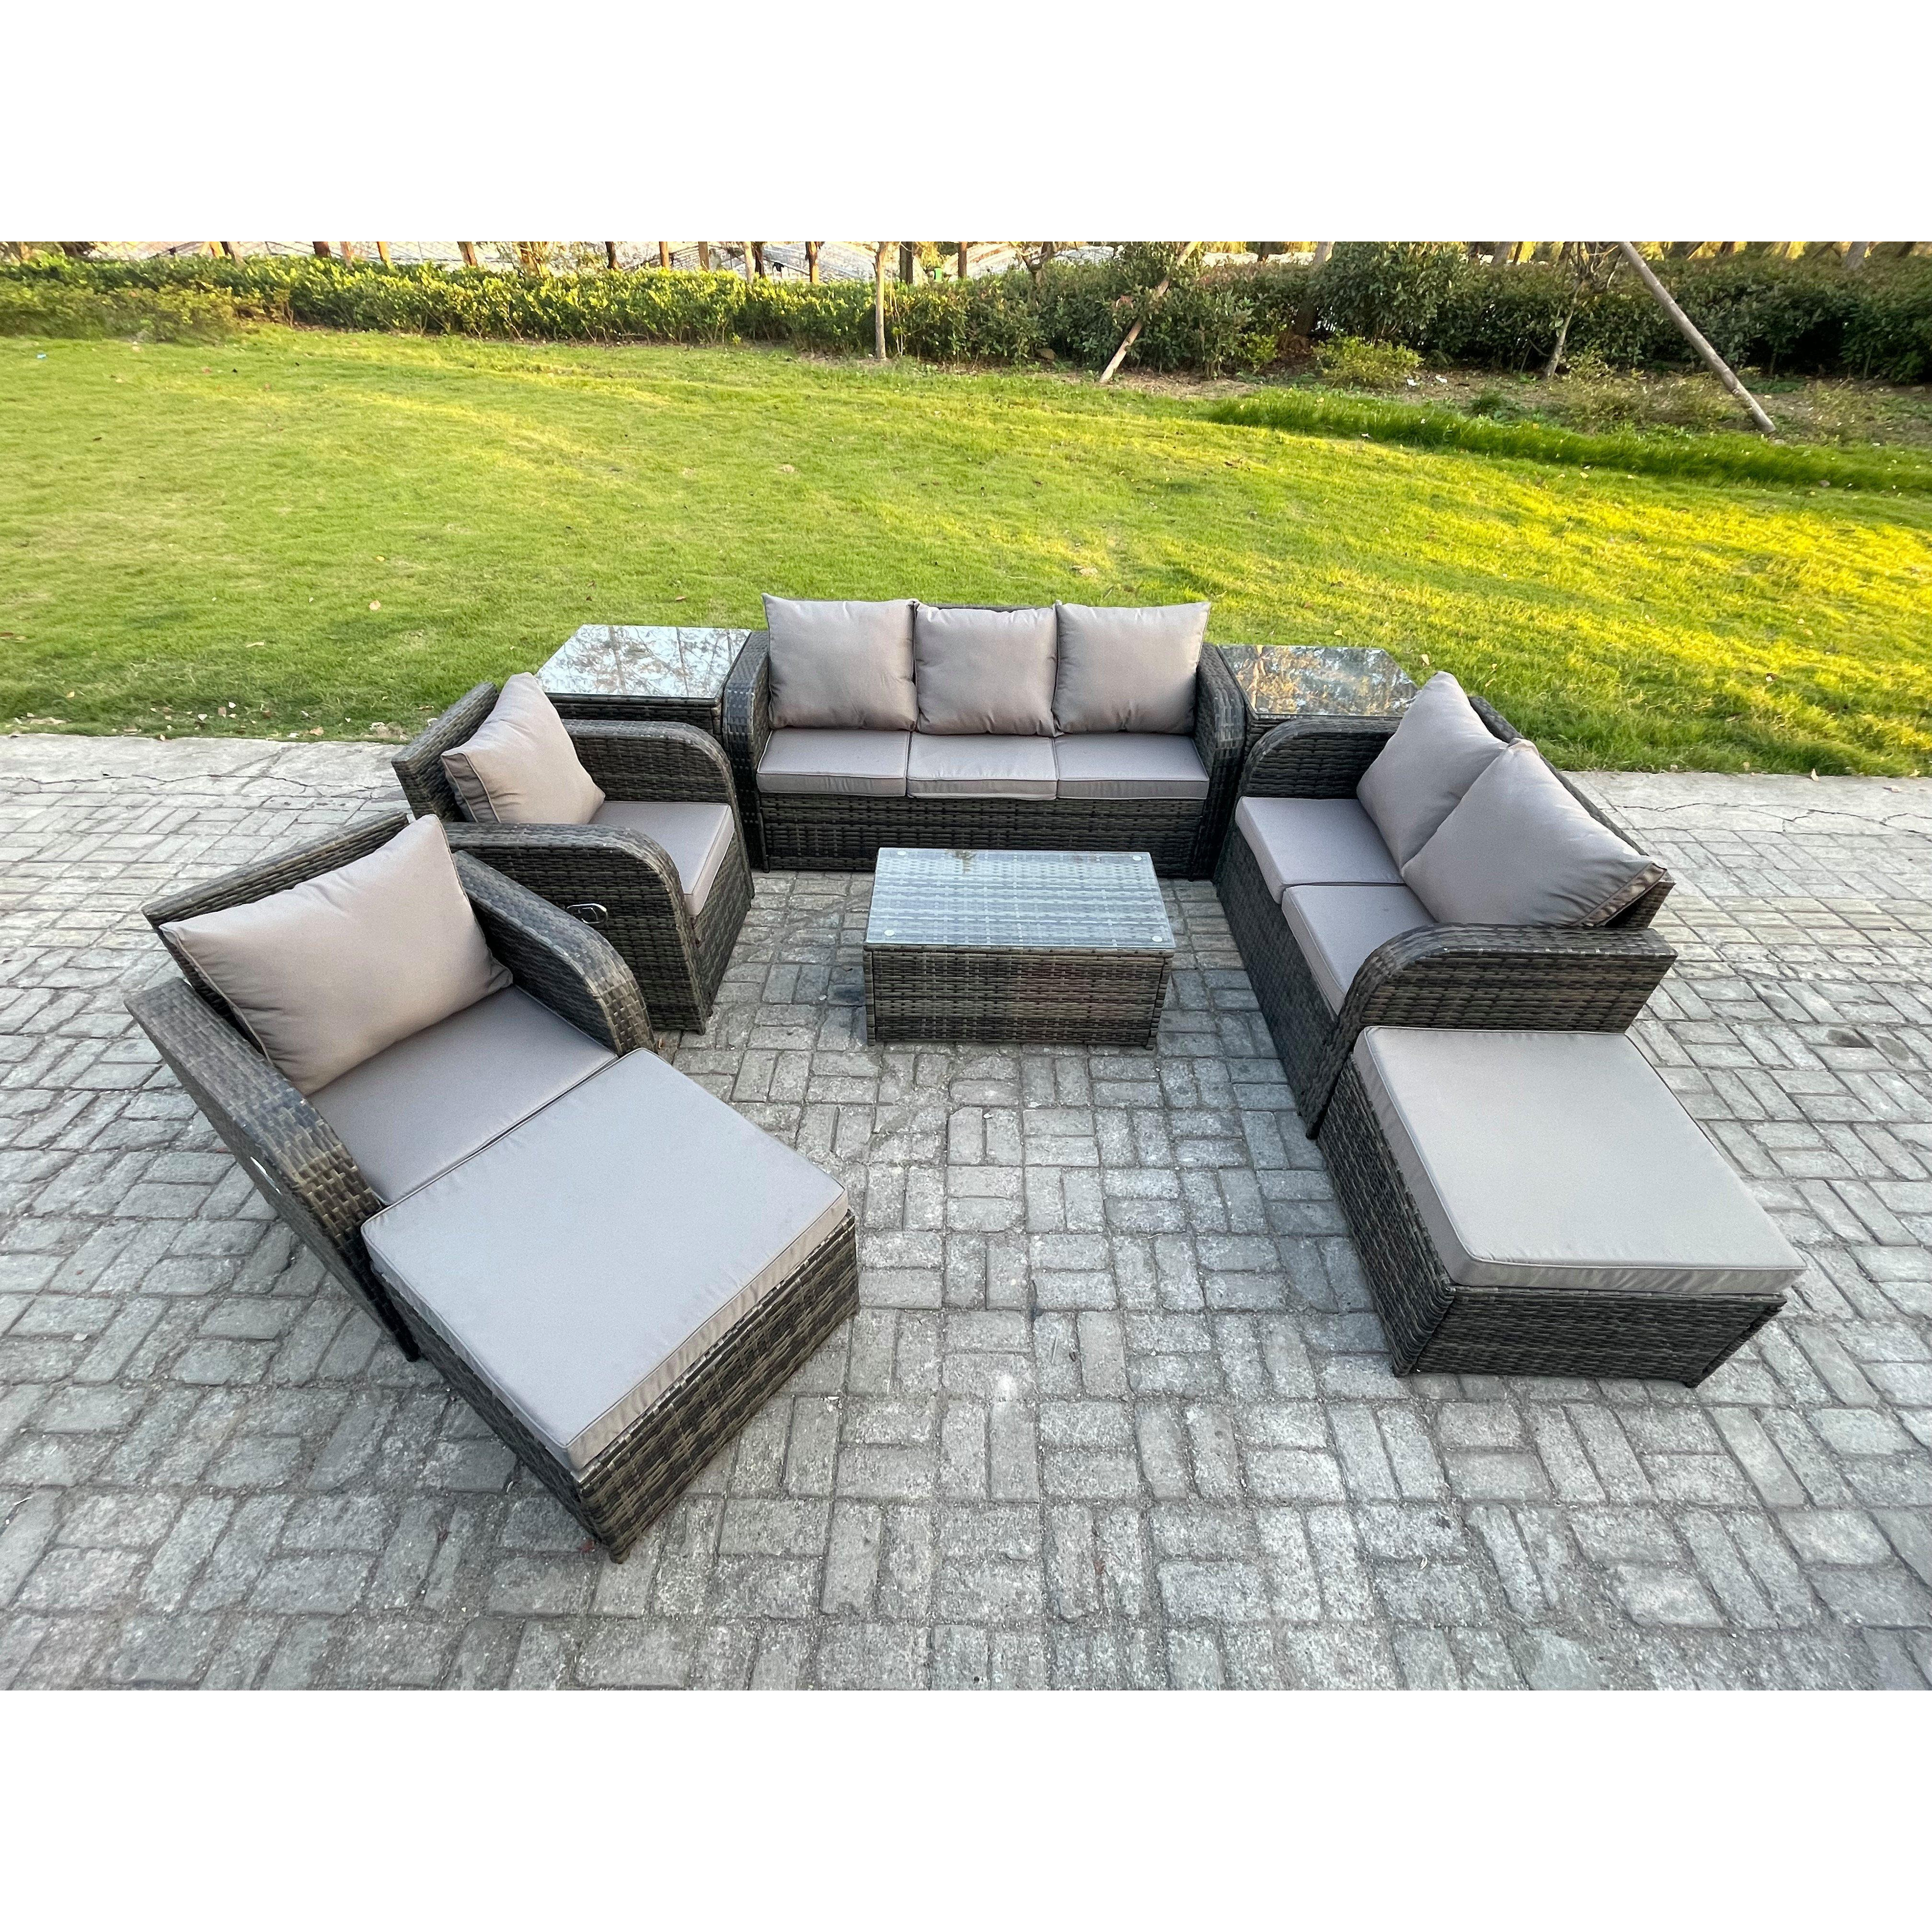 Patio Garden Furniture Sets Wicker 9 Seater Outdoor Rattan Furniture Sofa Sets with Rectangular Coffee Table Reclining Chair - image 1